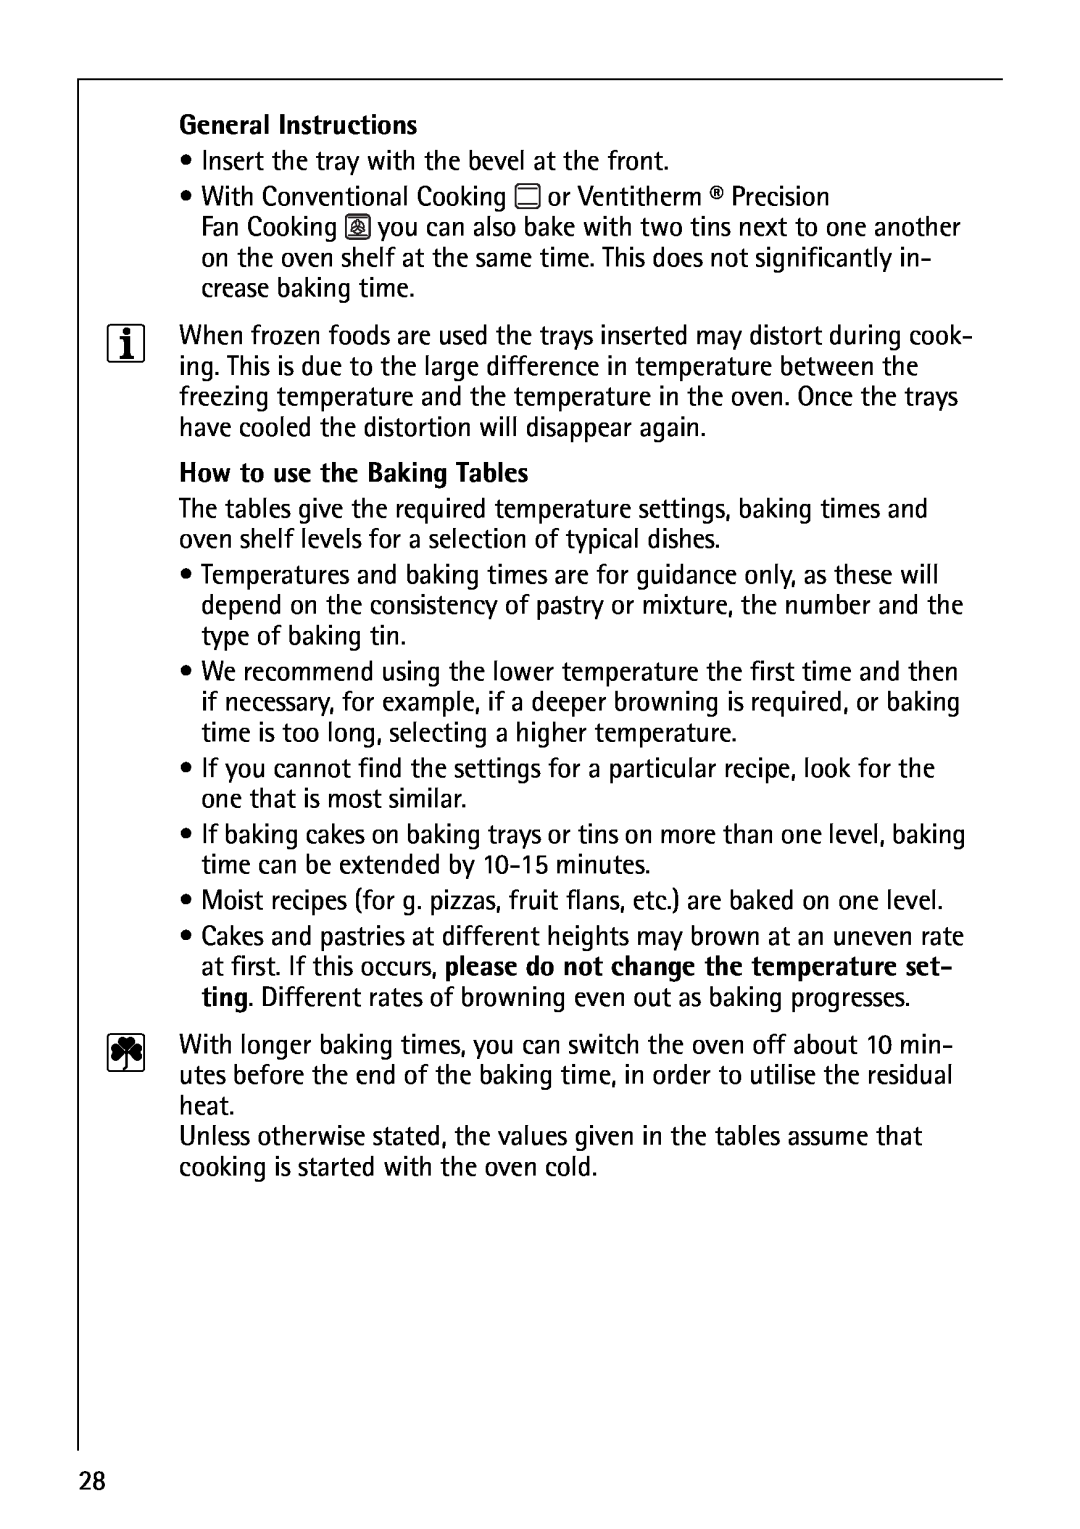 Electrolux B5741-4 manual General Instructions, How to use the Baking Tables 